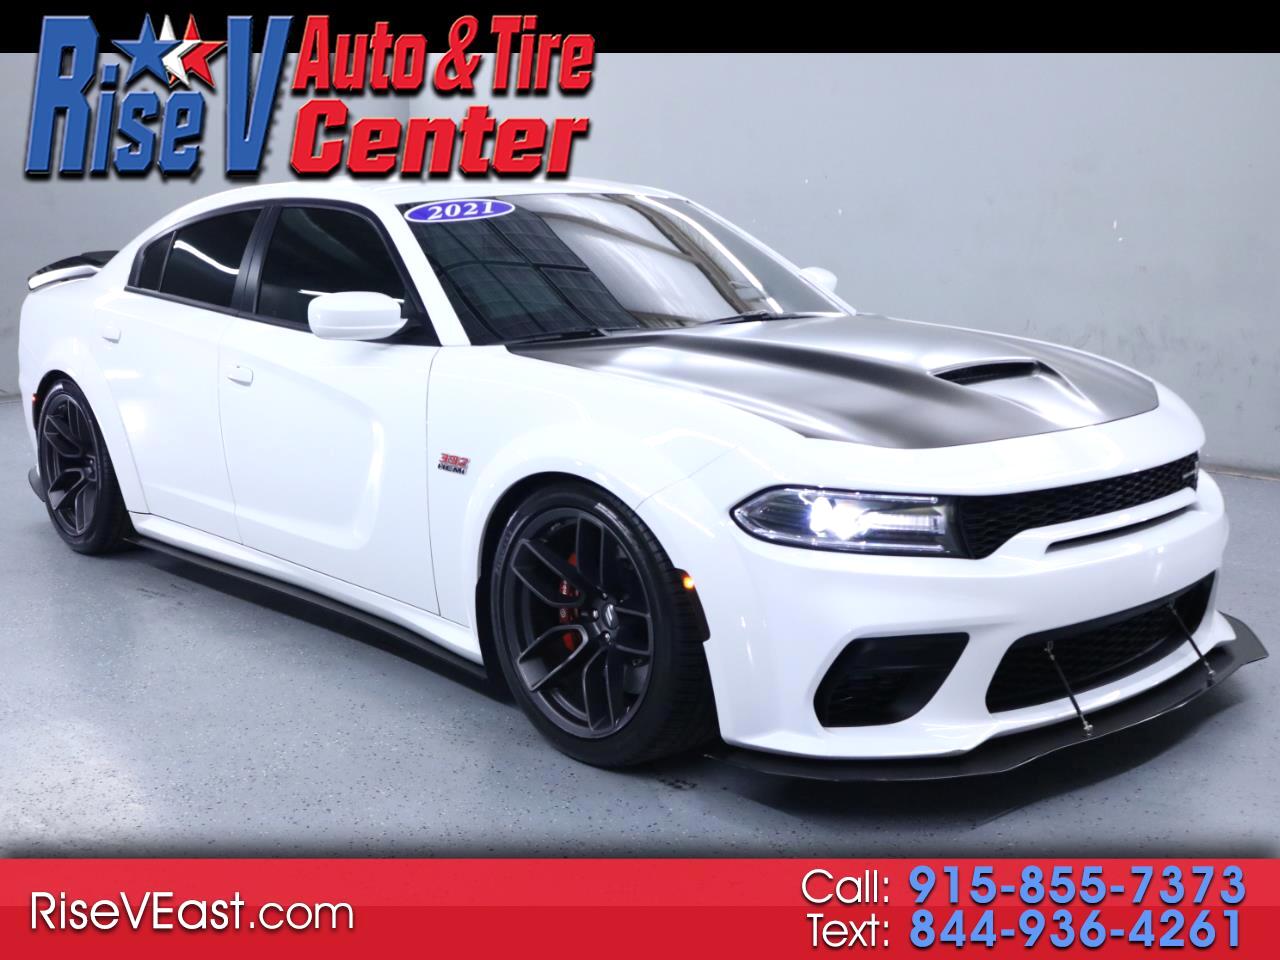 Dodge Charger Scat Pack 2021